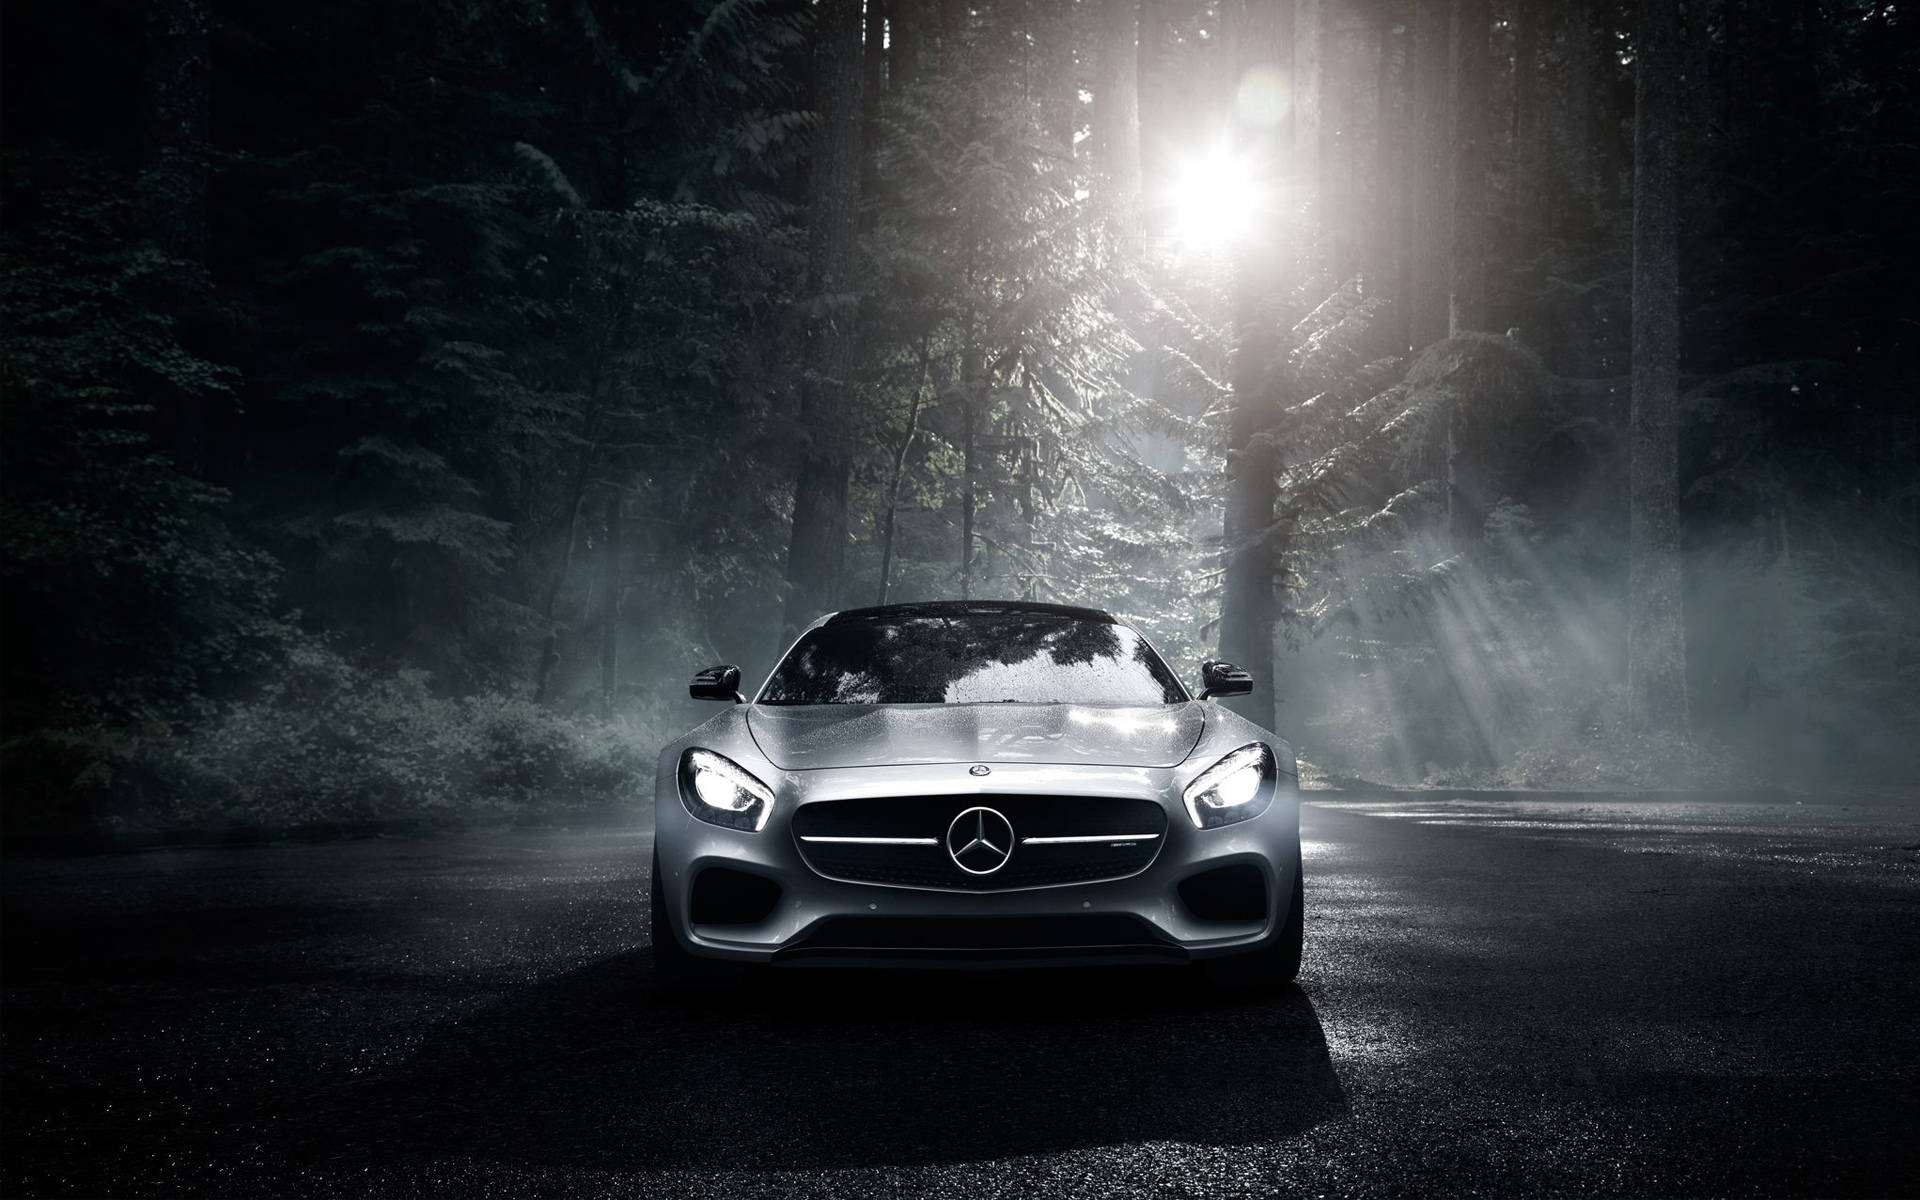 "The Style and Power of Mercedes Benz AMG" Wallpaper